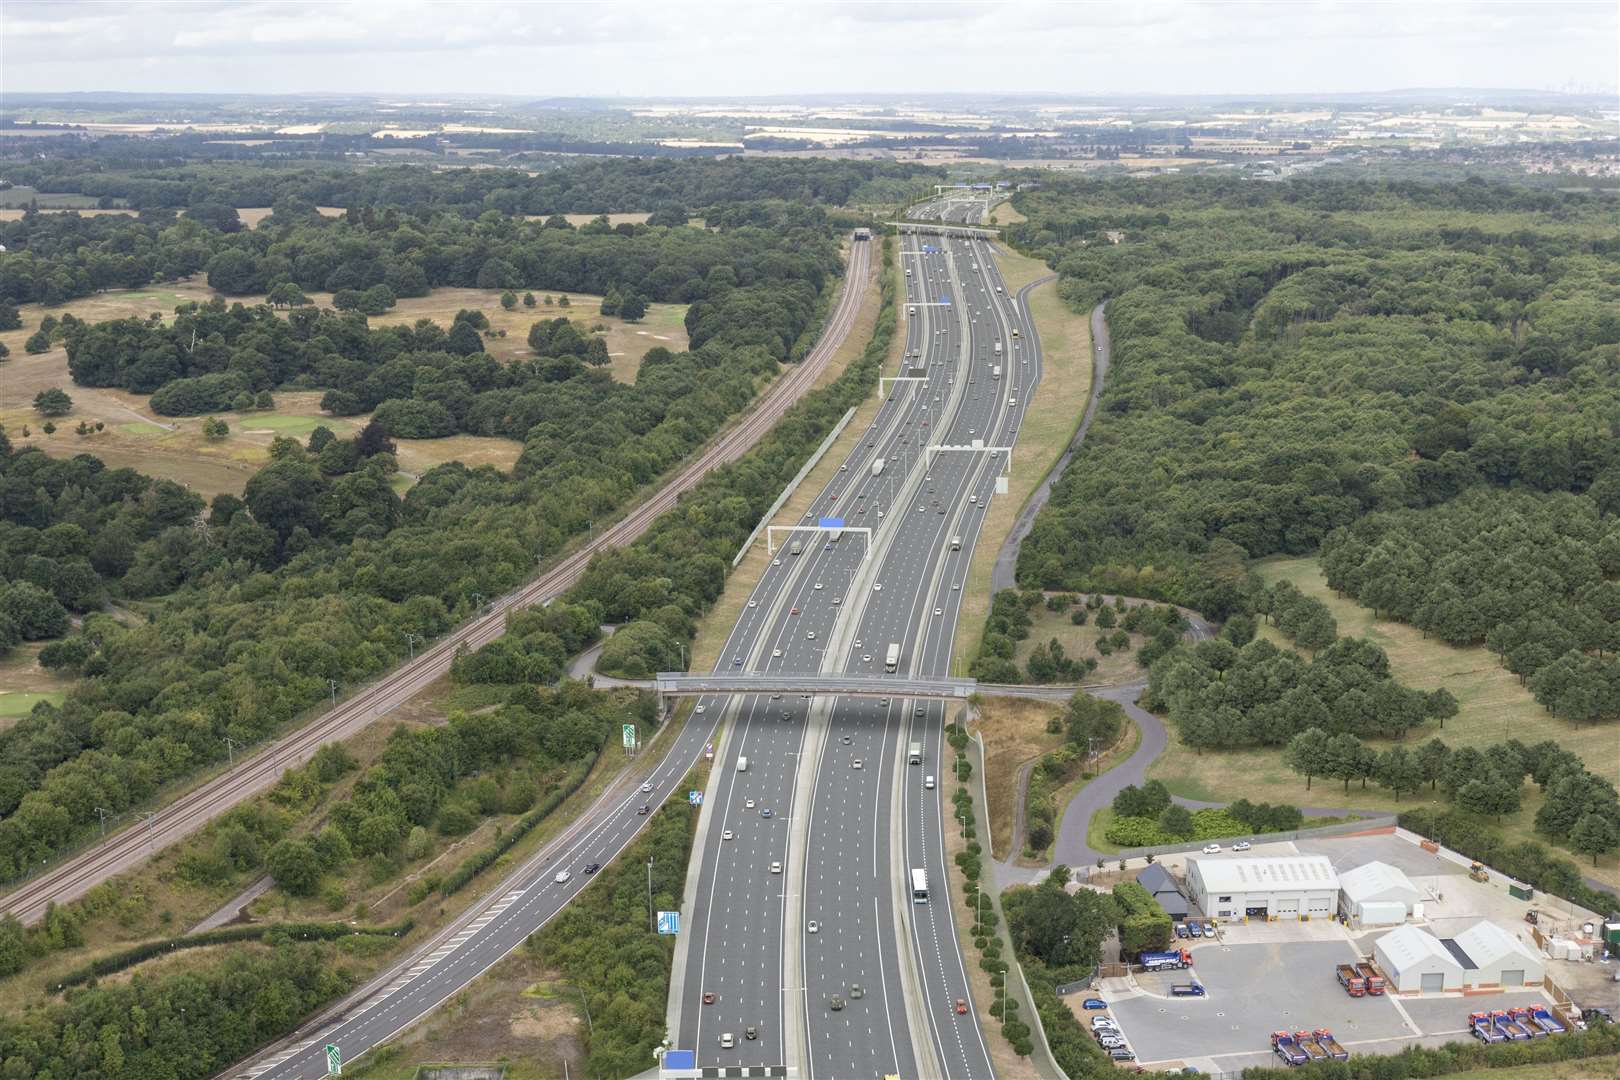 The proposed route of the Lower Thames Crossing Picture: Highways England/Joas Souza Photographer